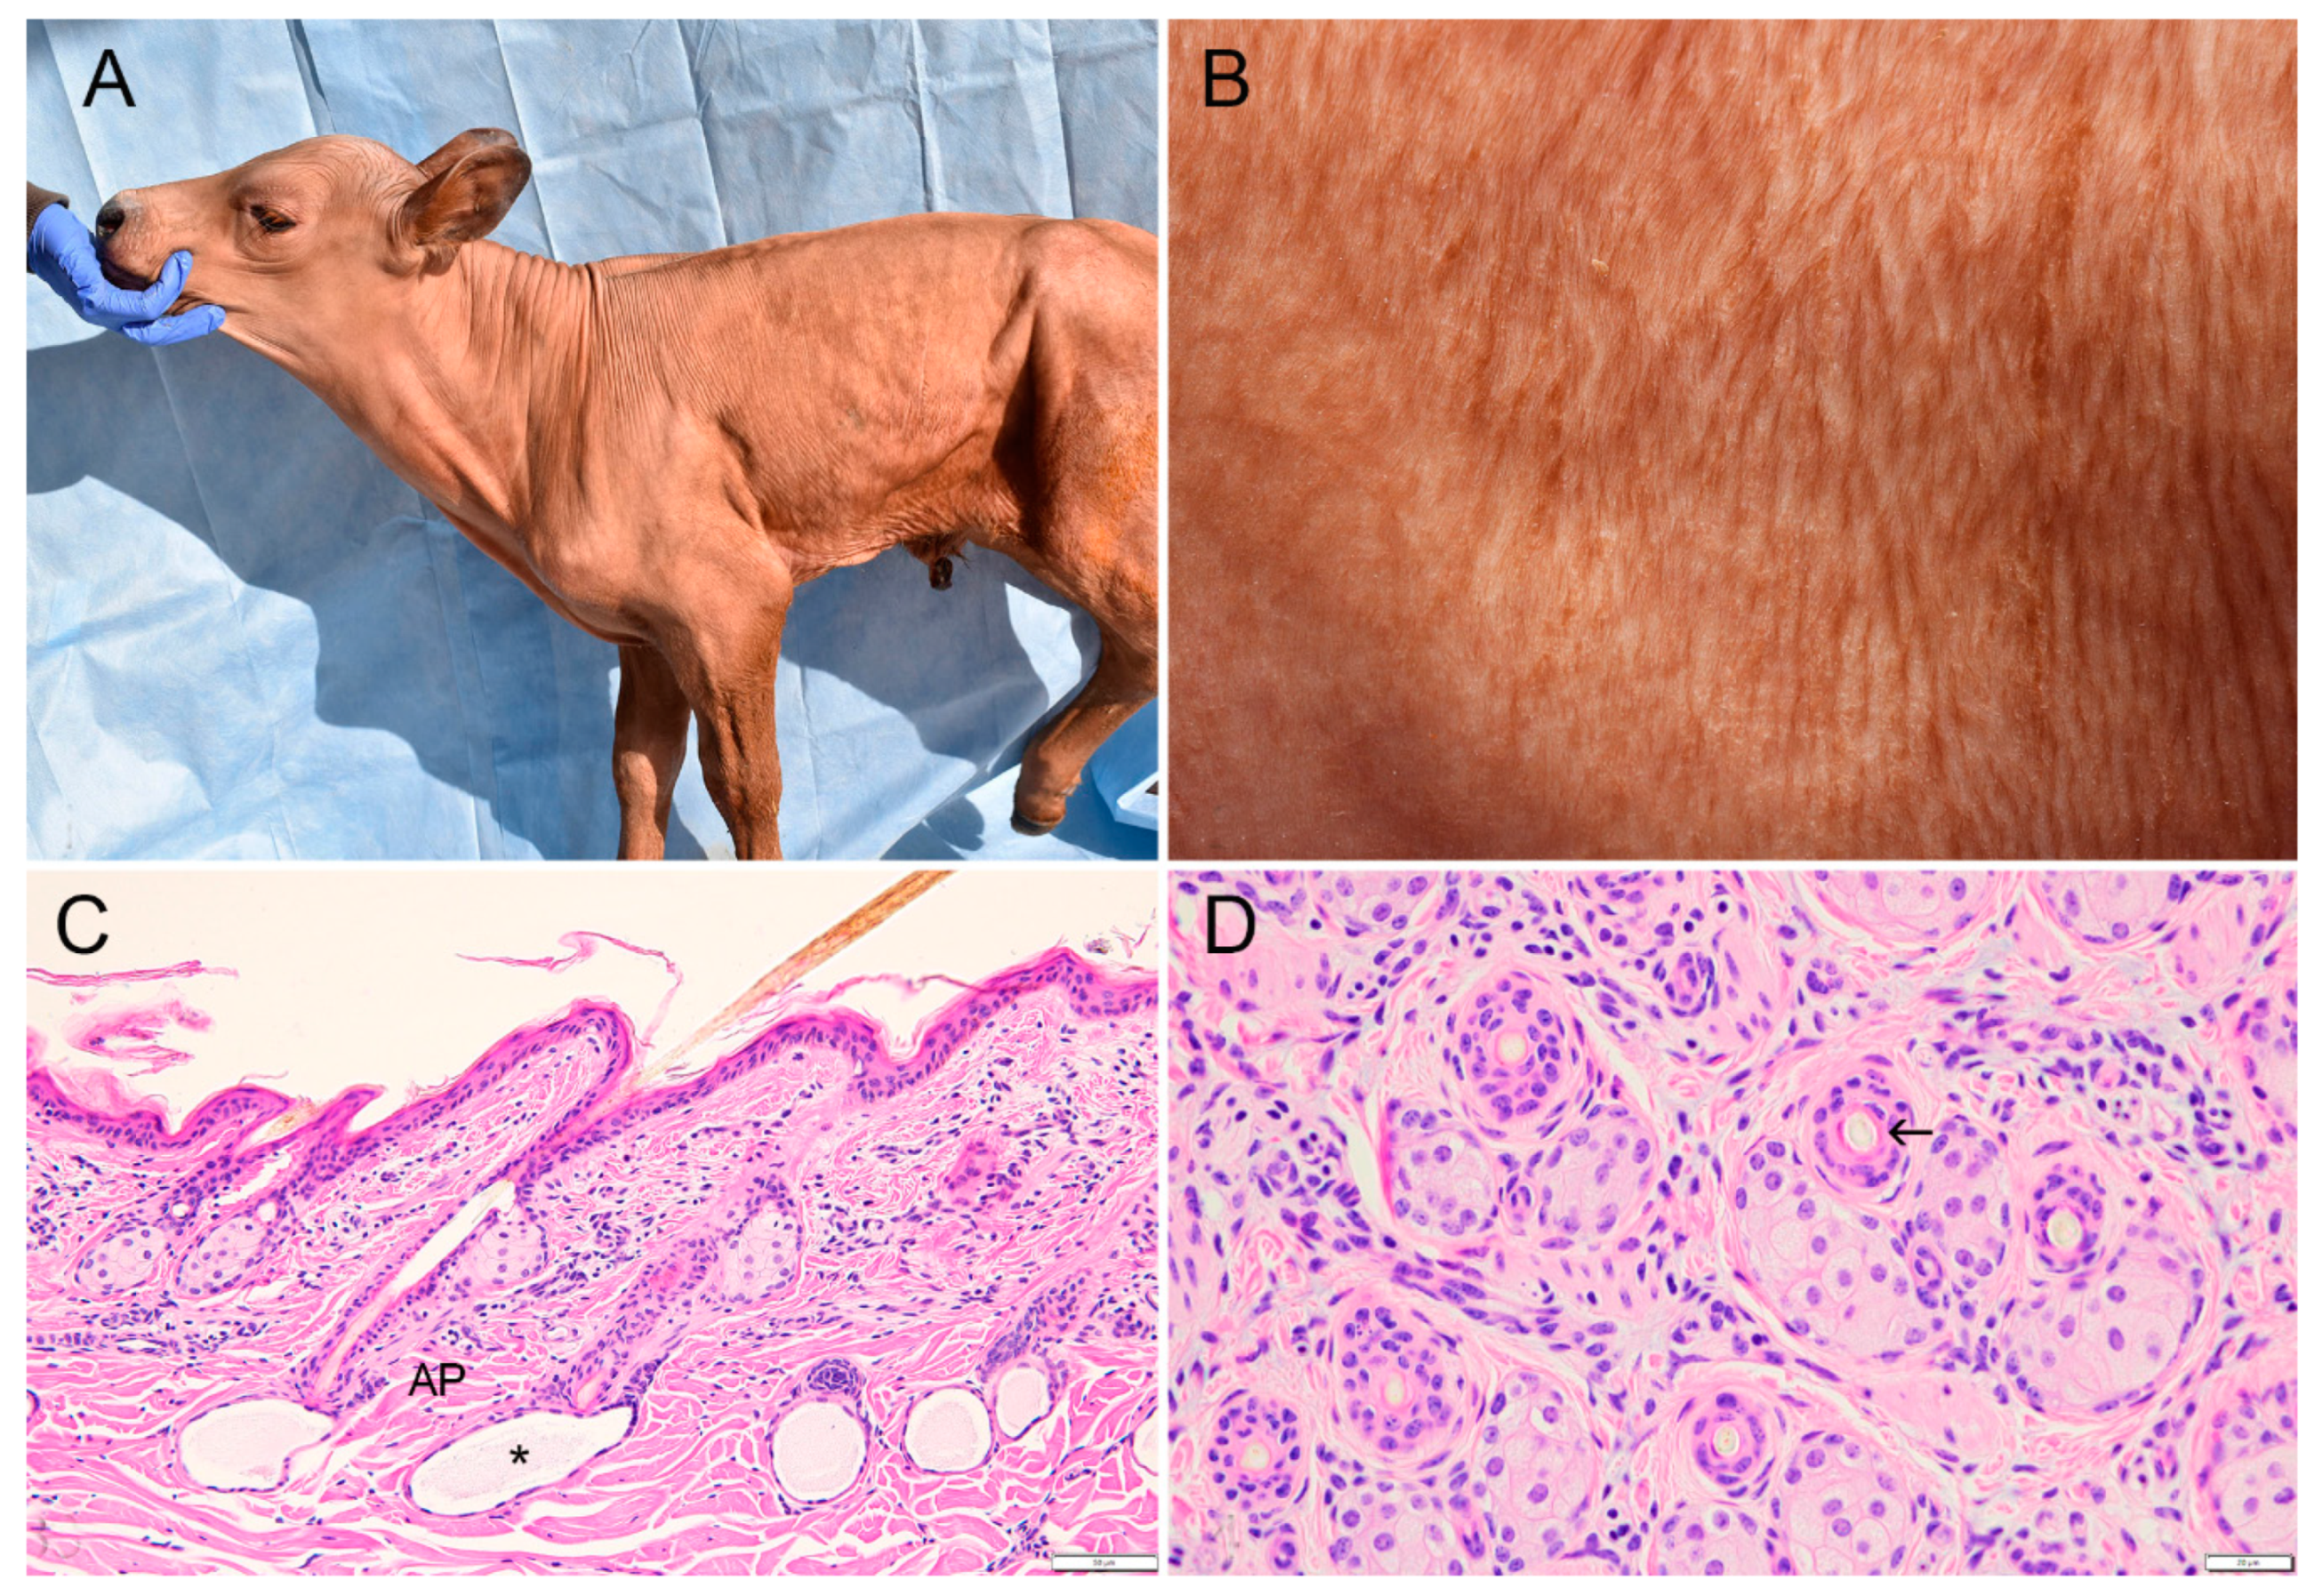 Animals | Free Full-Text | X-Linked Hypohidrotic Ectodermal Dysplasia in  Crossbred Beef Cattle Due to a Large Deletion in EDA